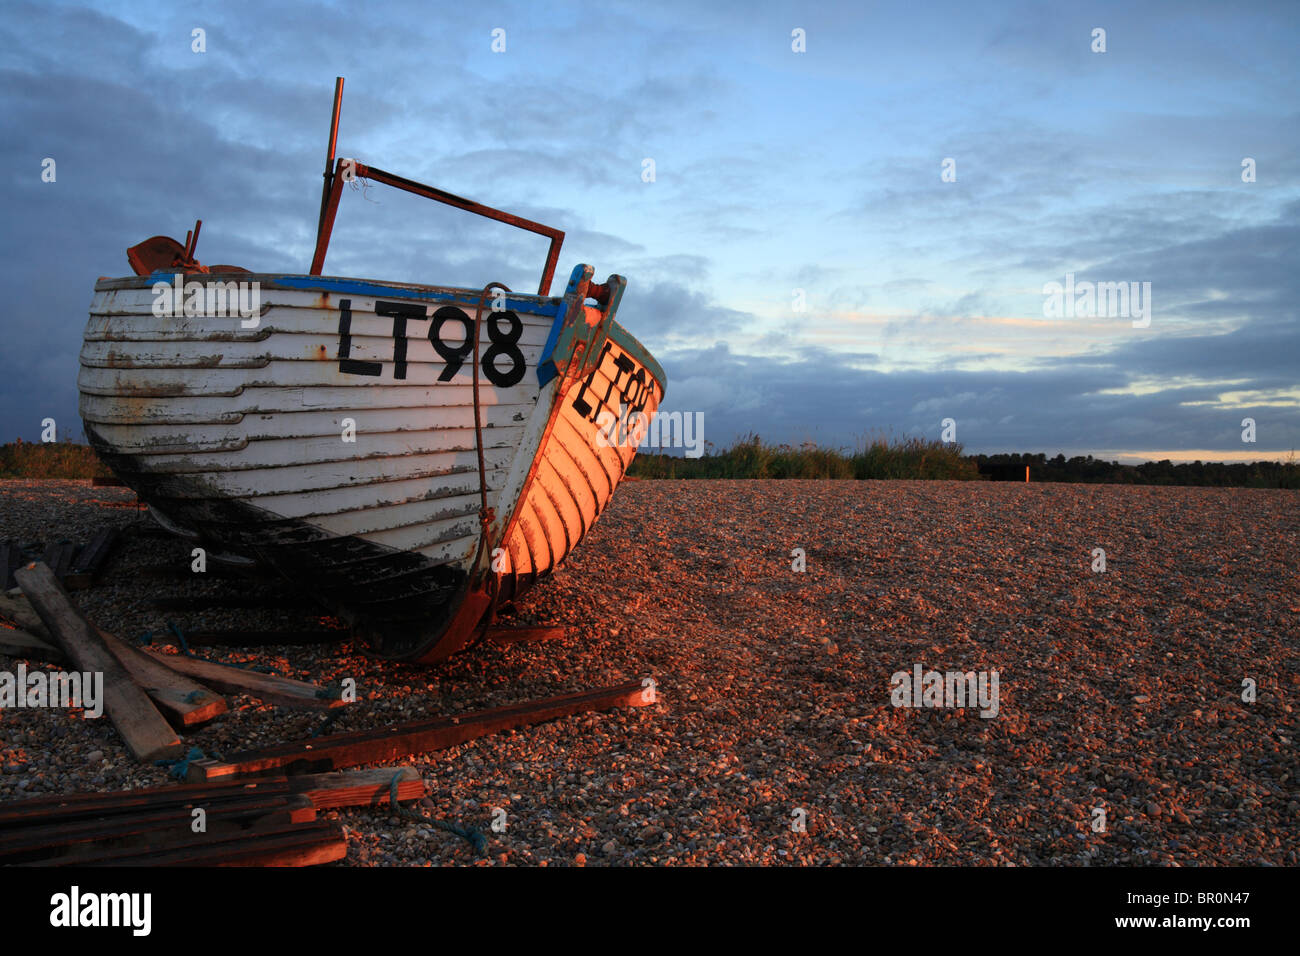 Dunwich fishing boat at dawn pulled up on the shingle beach, Suffolk Coast, East Anglia, England, UK Stock Photo